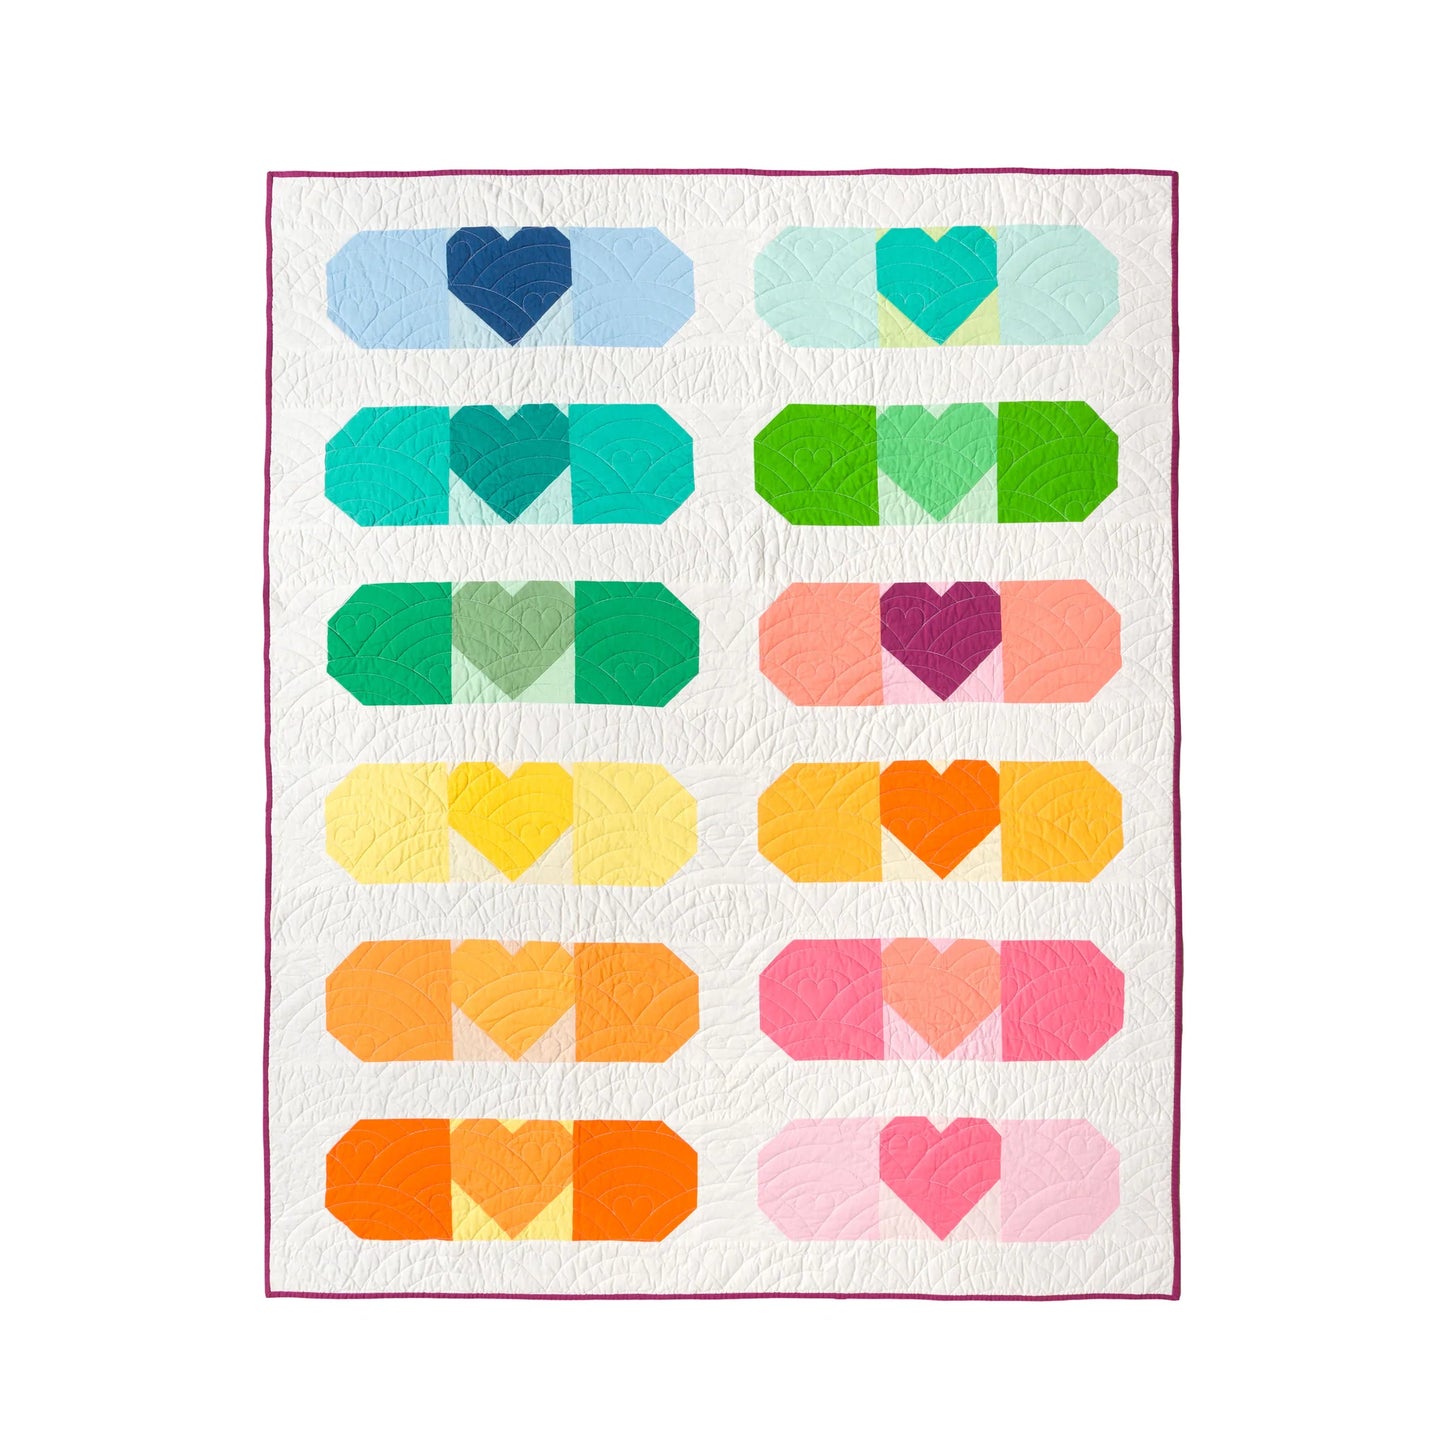 Band-Aid Quilt | Printed Pattern